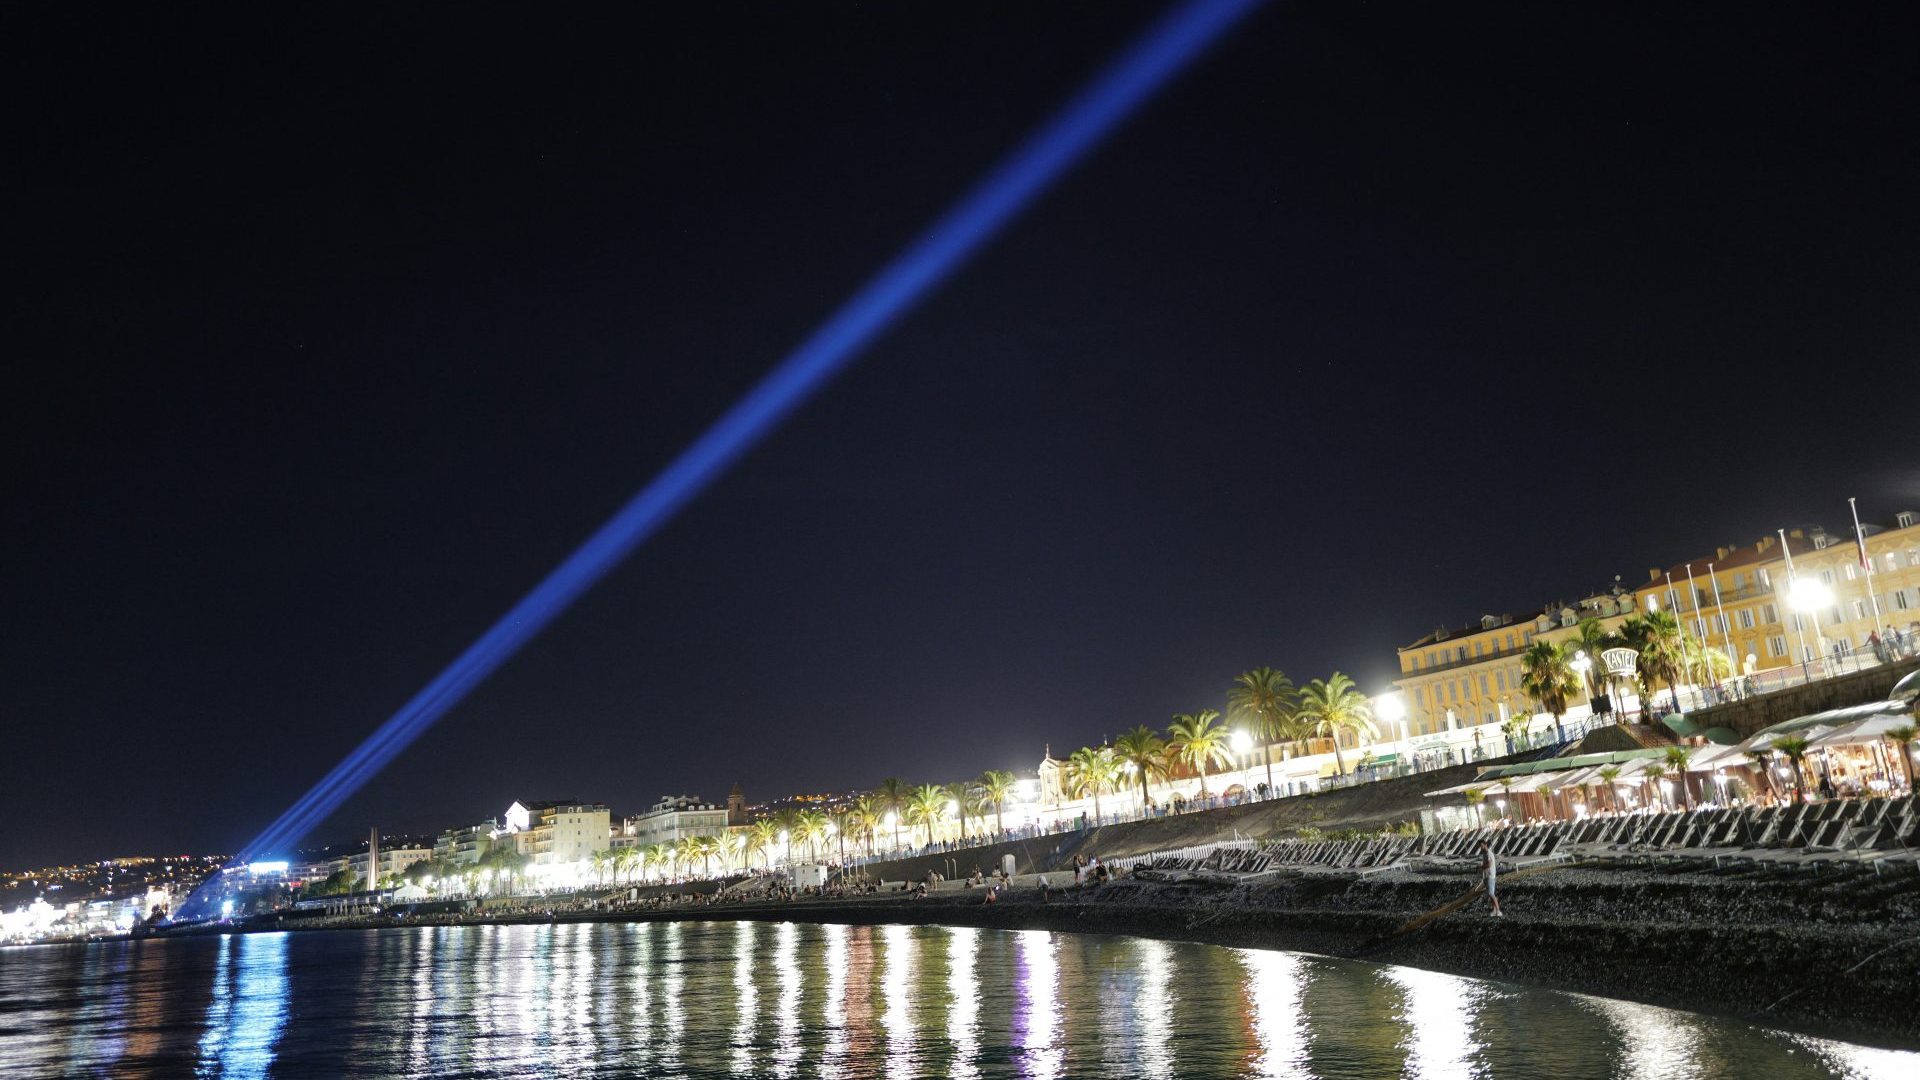 laser lights beams above the bay of Nice, southern France, during a commemorative ceremony marking the anniversary of the 2016 Bastille Day terrorist truck attack. Photo: VALERY HACHE/AFP via Getty Images